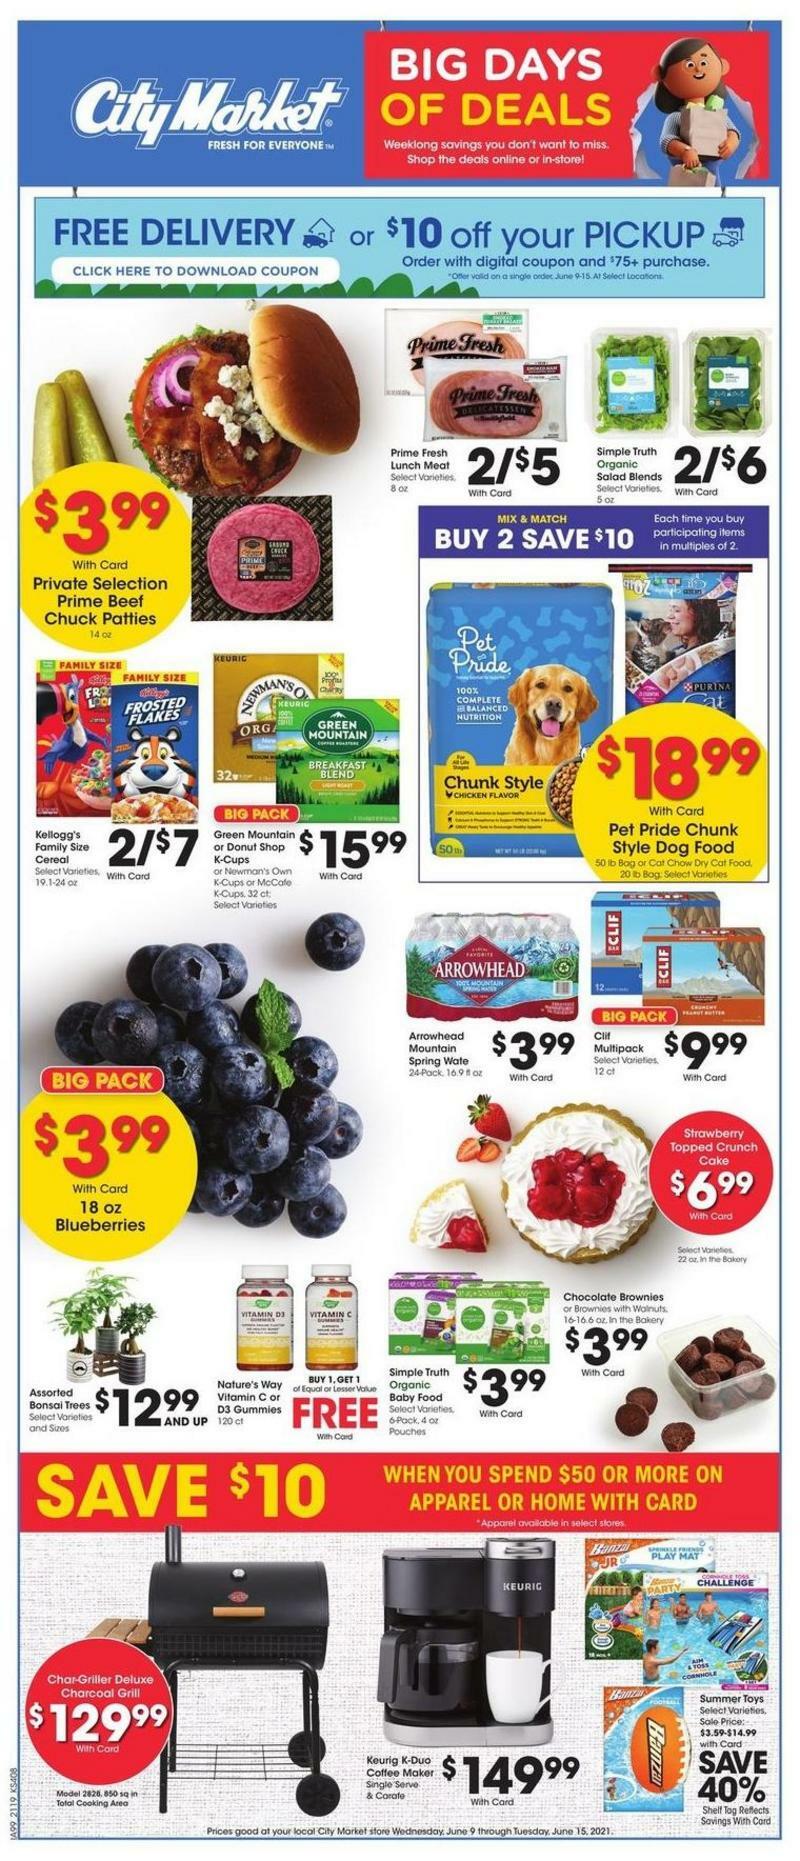 City Market Big Days of Deals Weekly Ad from June 9